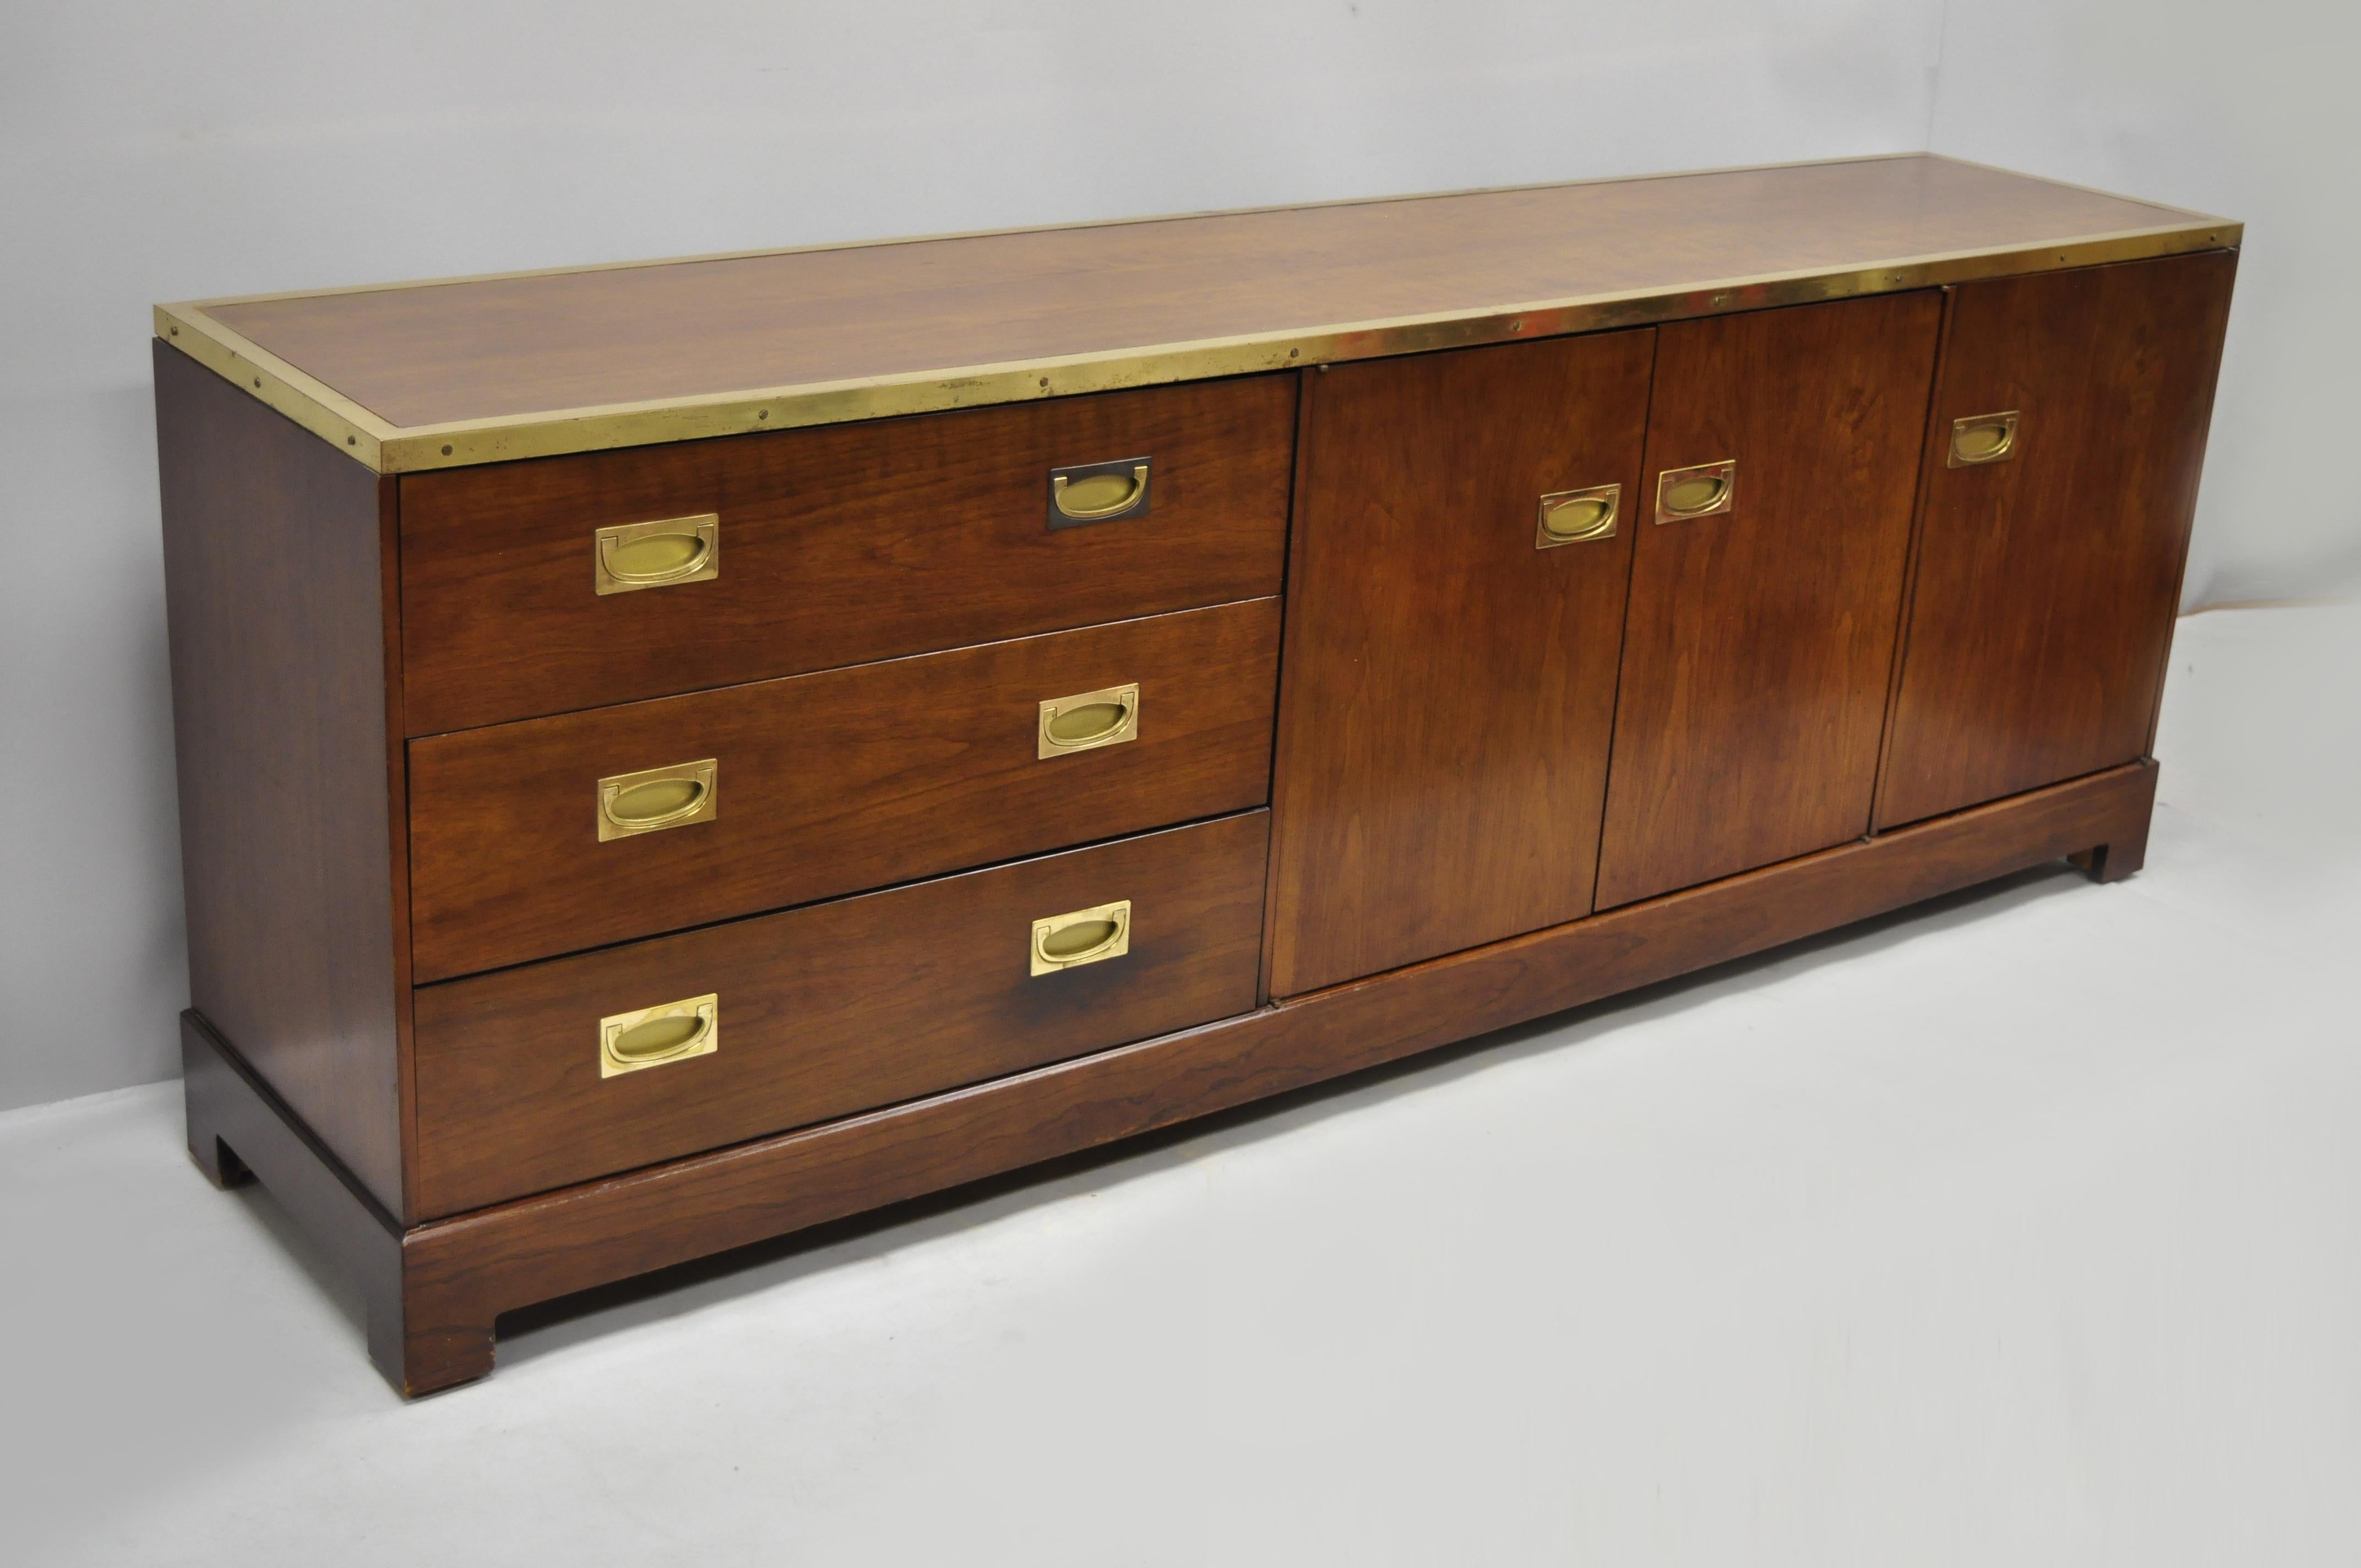 Late 20th century English campaign style cherry credenza cabinet with brass trim by Directional 